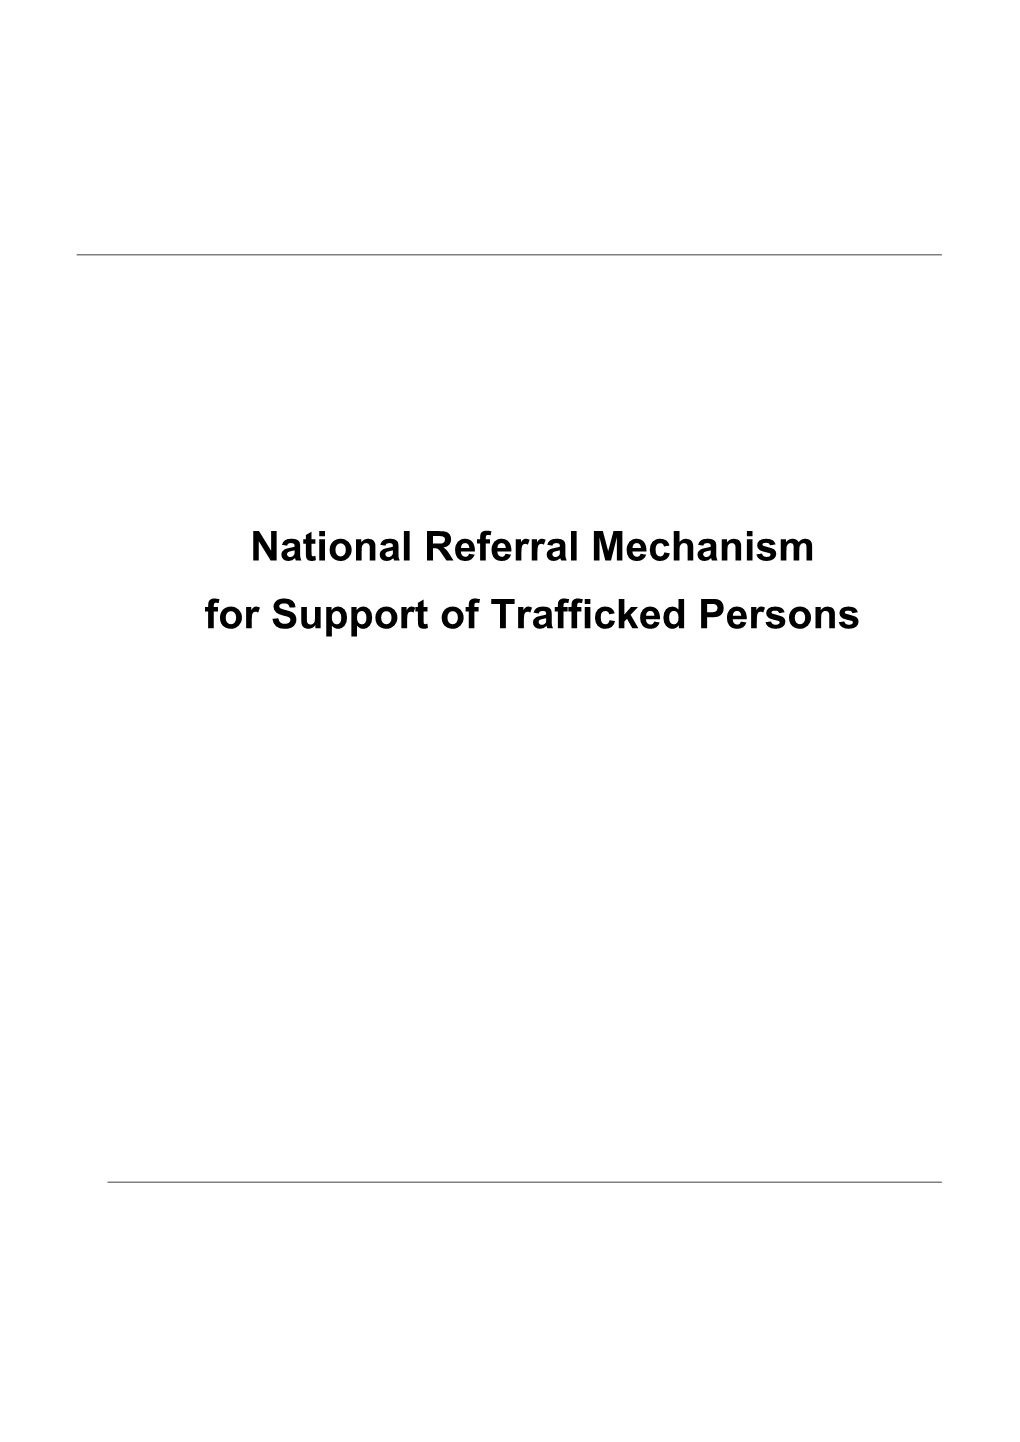 National Referral Mechanism for Support of Trafficked Persons